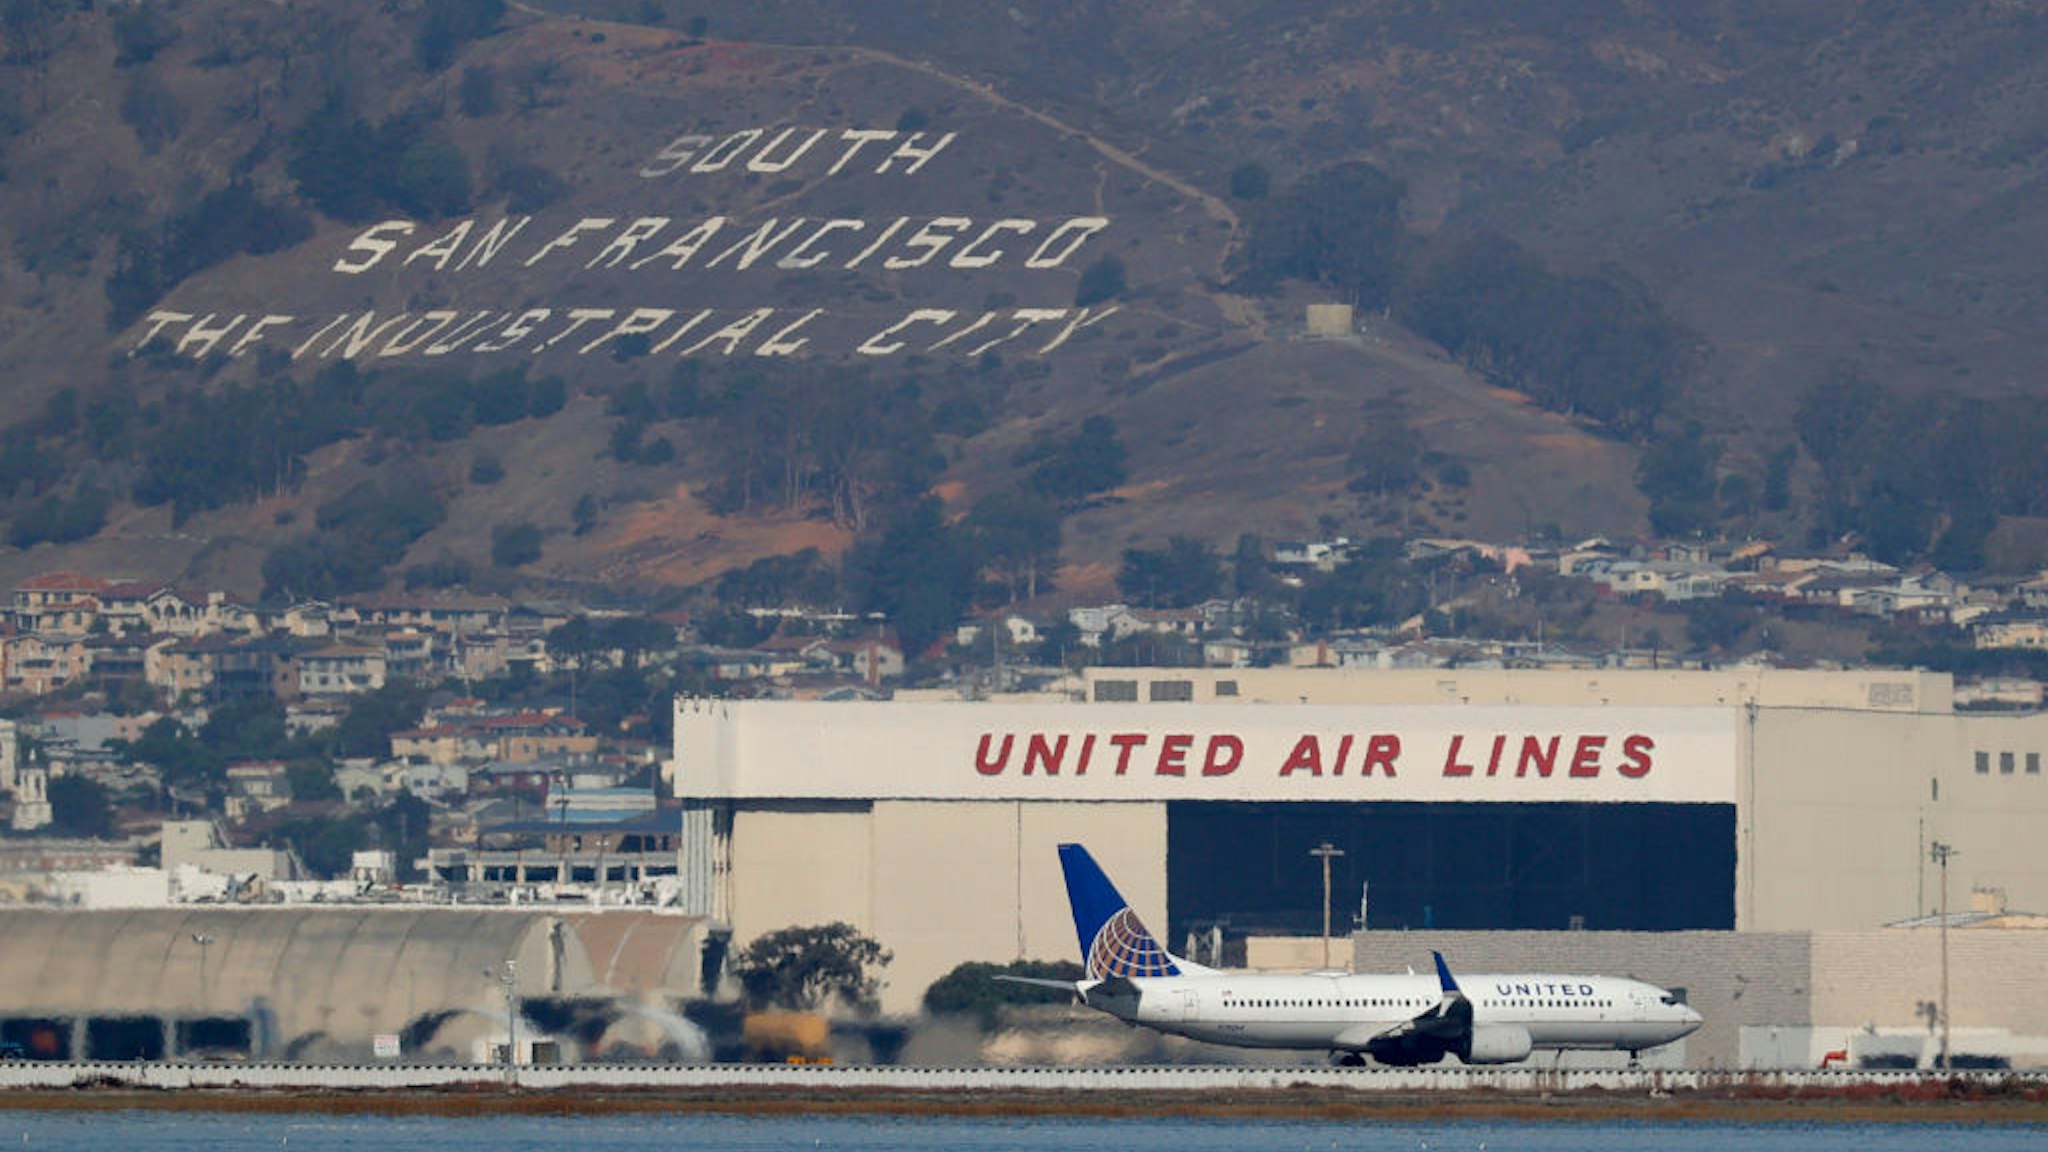 A United Airlines plane taxis on the runway at San Francisco International Airport on October 19, 2021 in San Francisco, California.